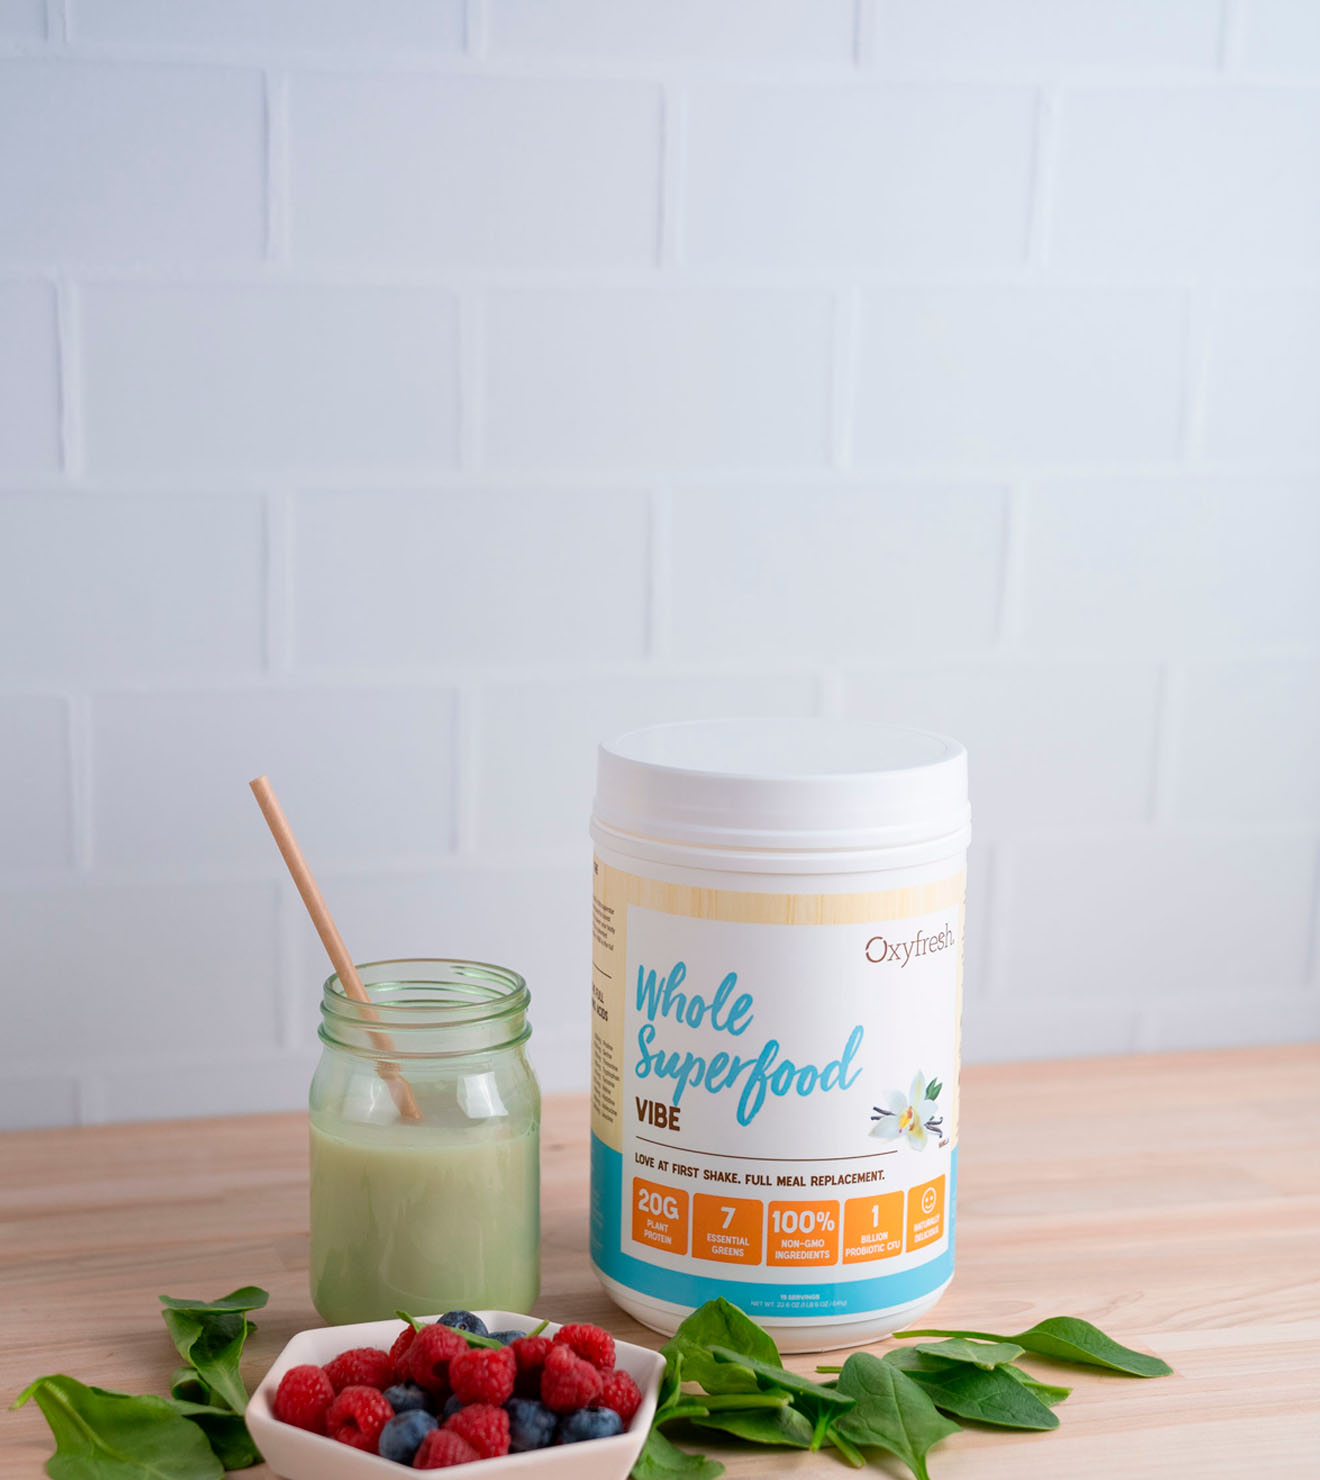 oxyfresh whole superfood vibe meal replacement shake vanilla vlavor 